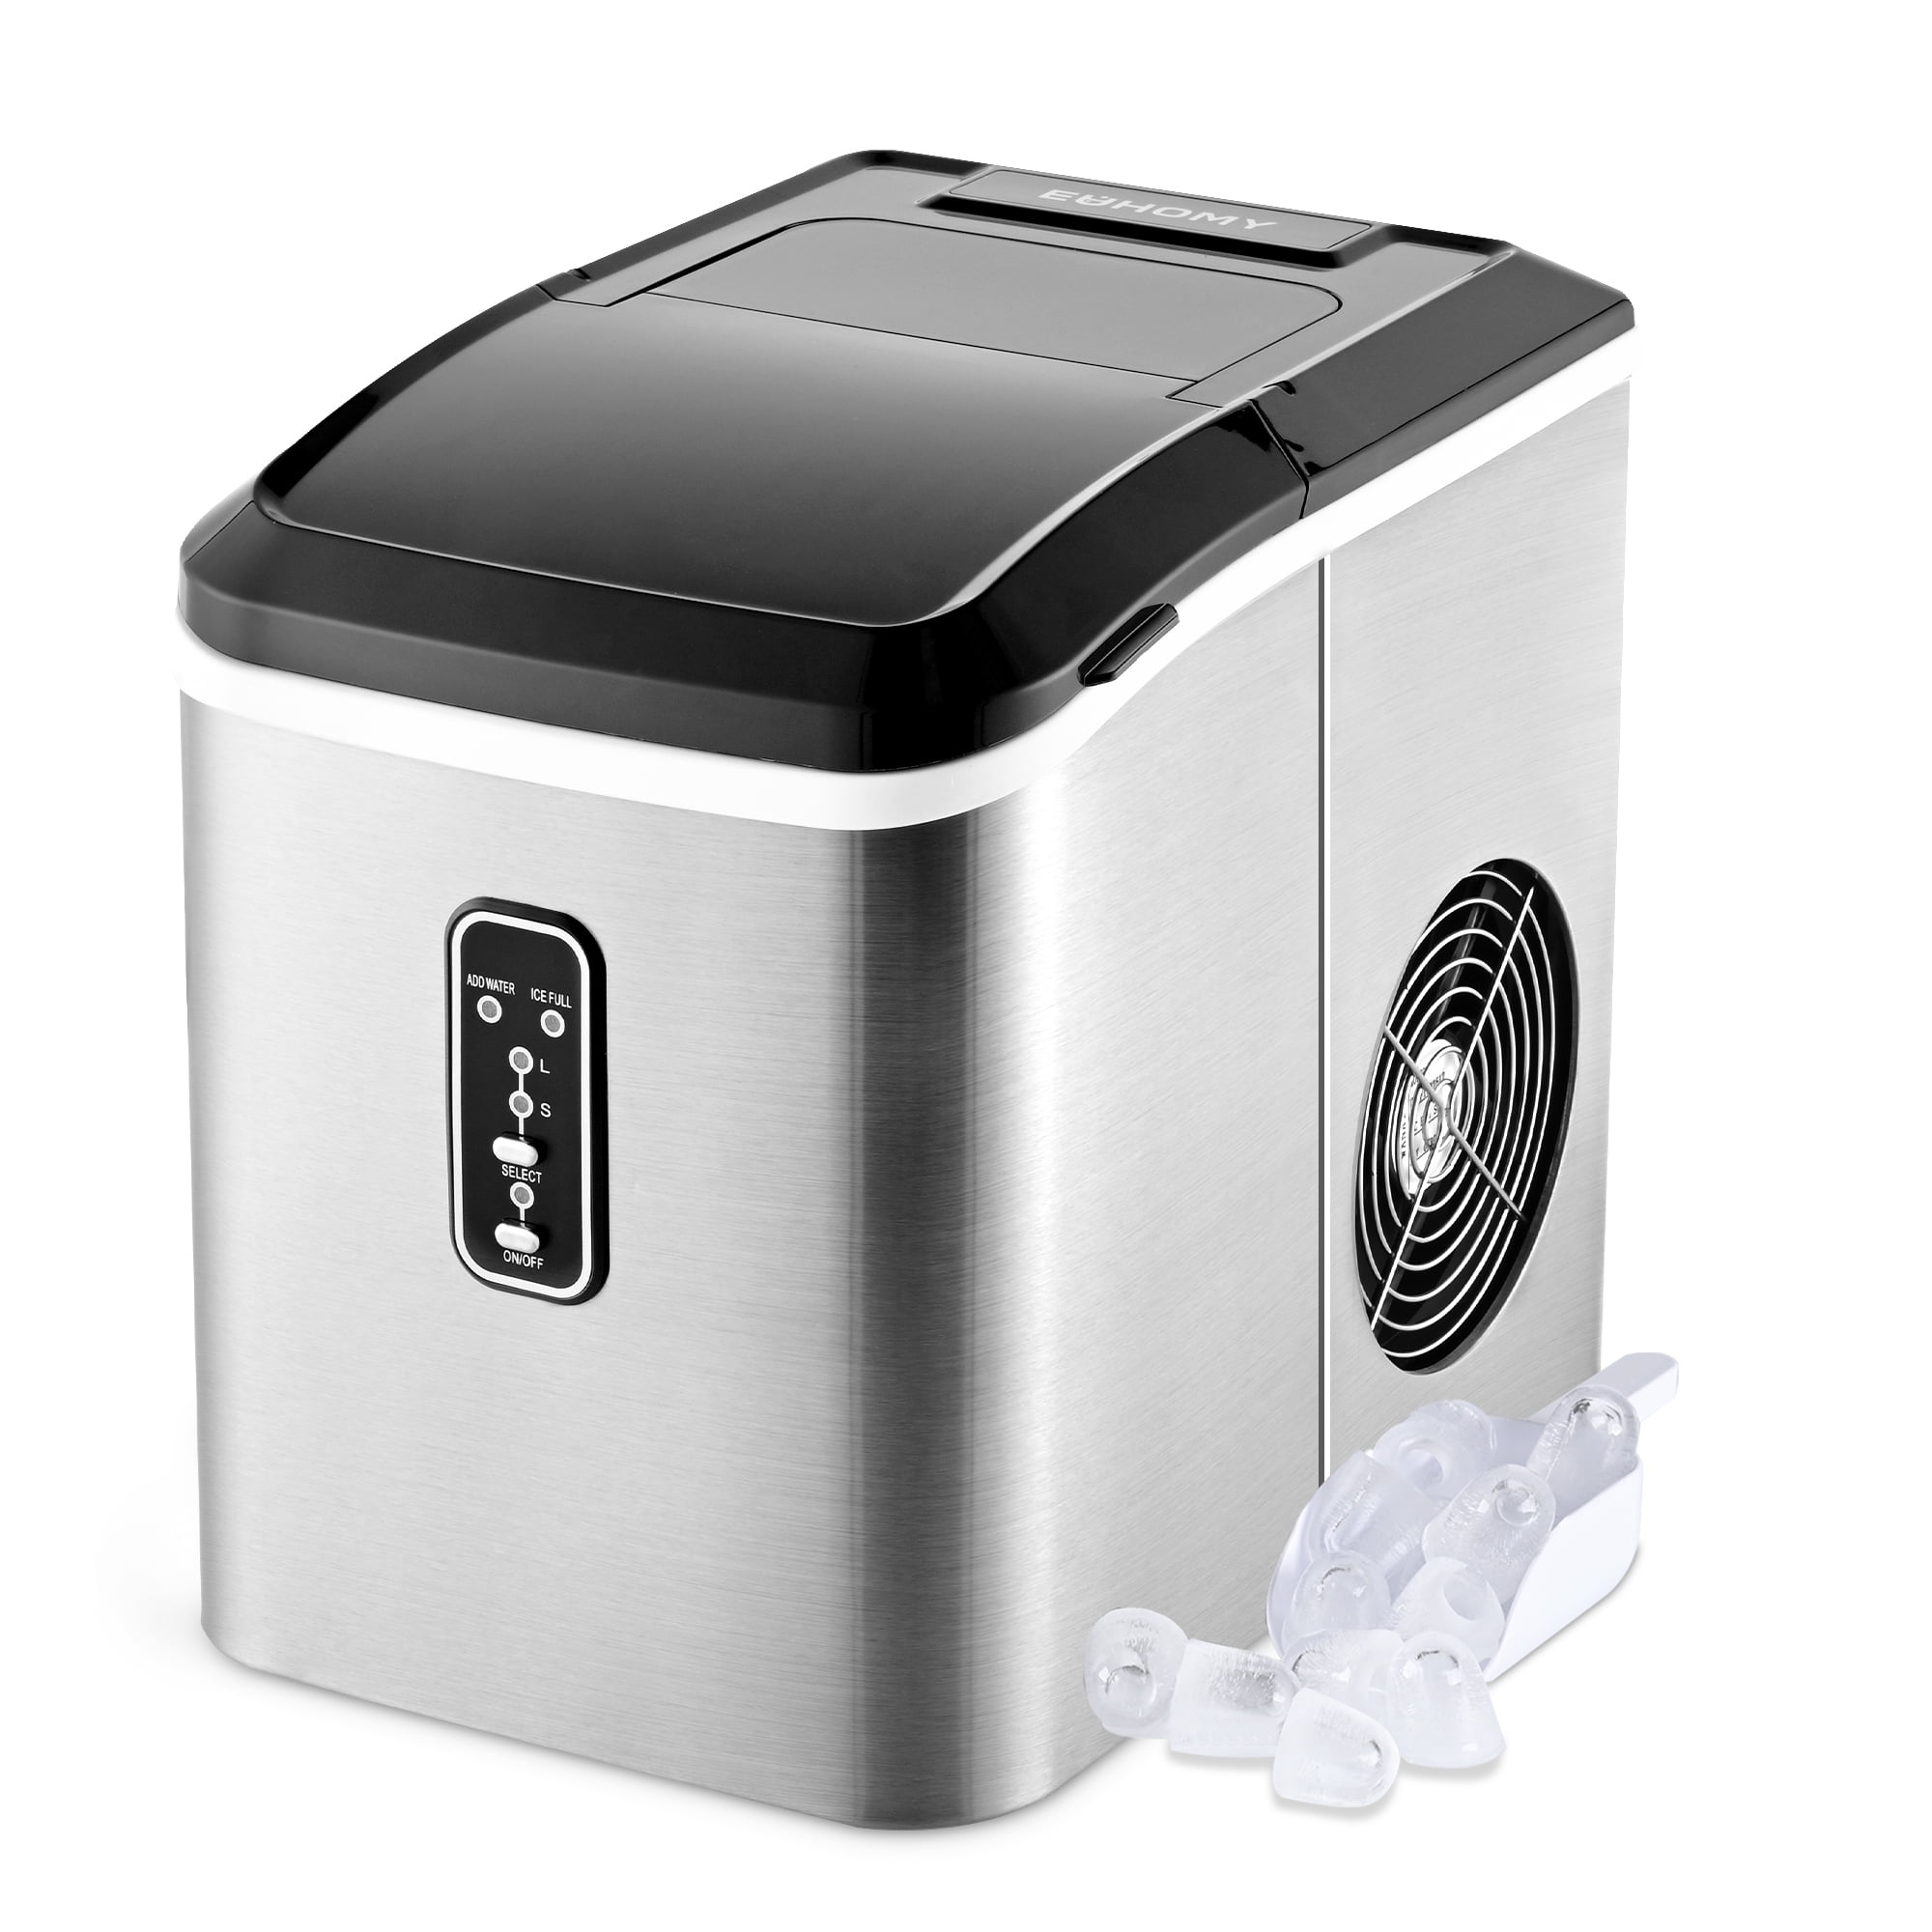 EUHOMY Countertop Ice Maker Machine with Handle, Auto-Cleaning